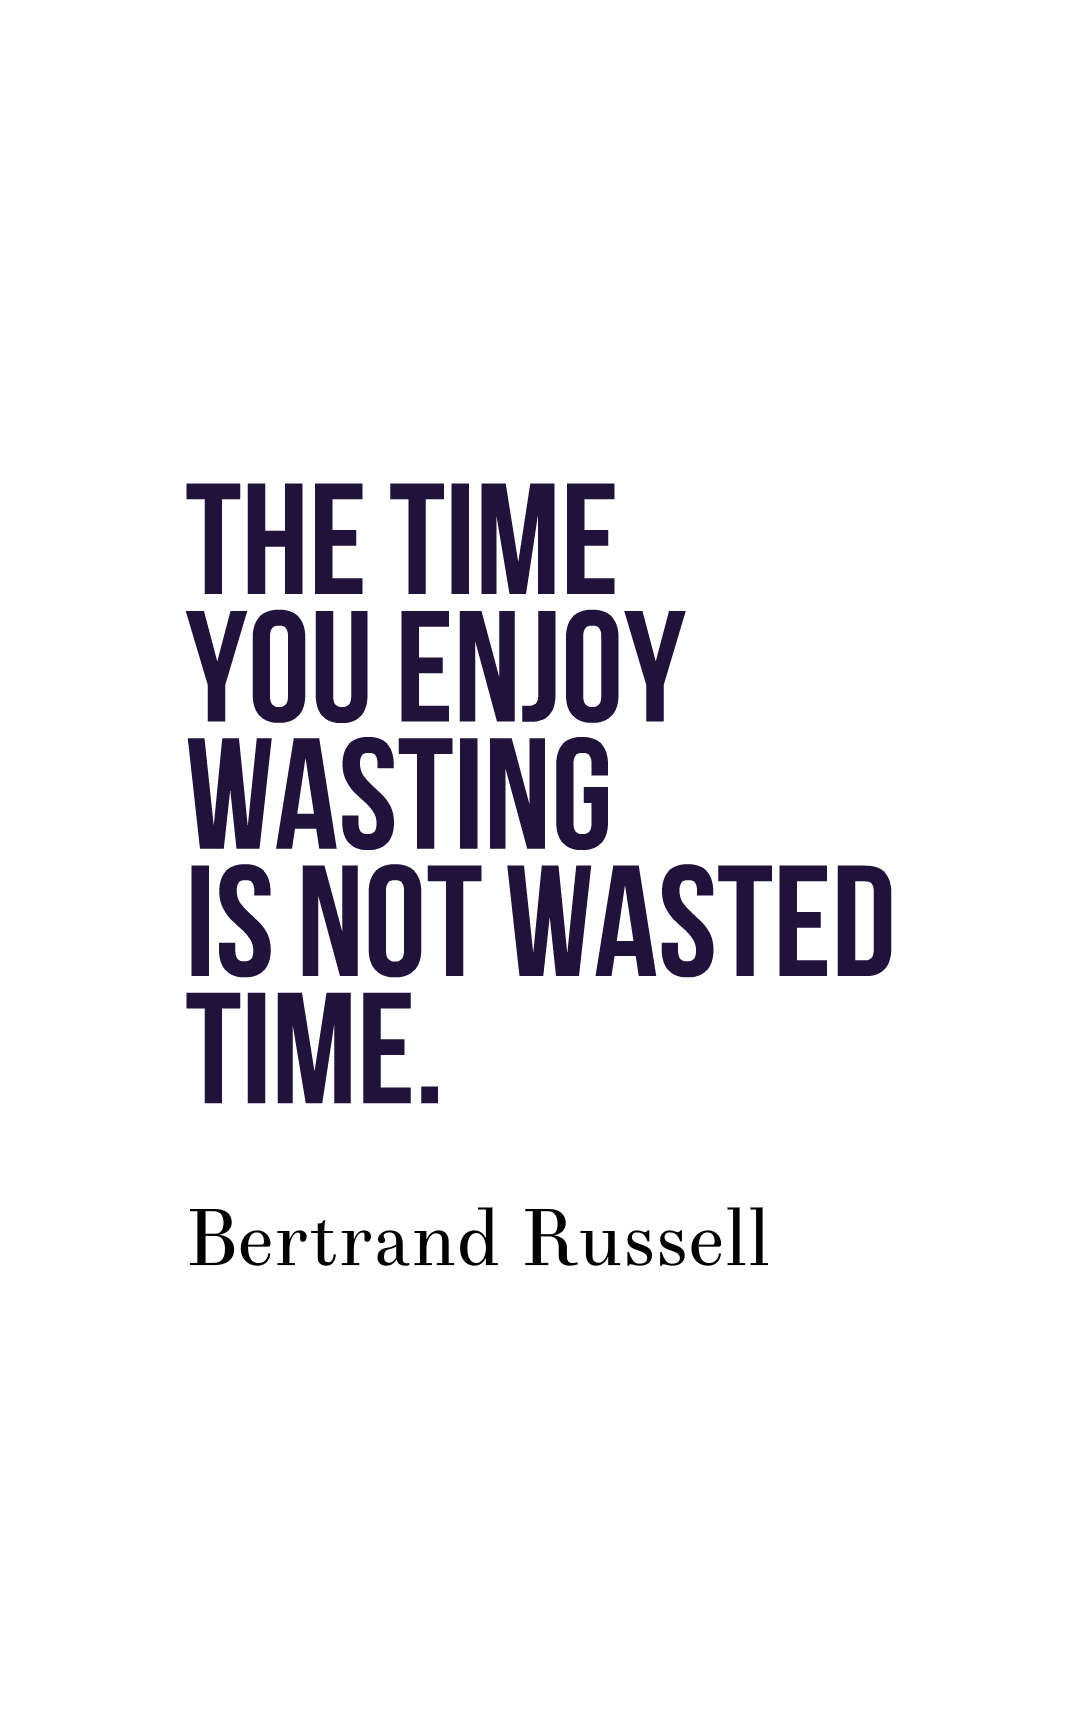 If you are not enjoying yourself, you are wasting time